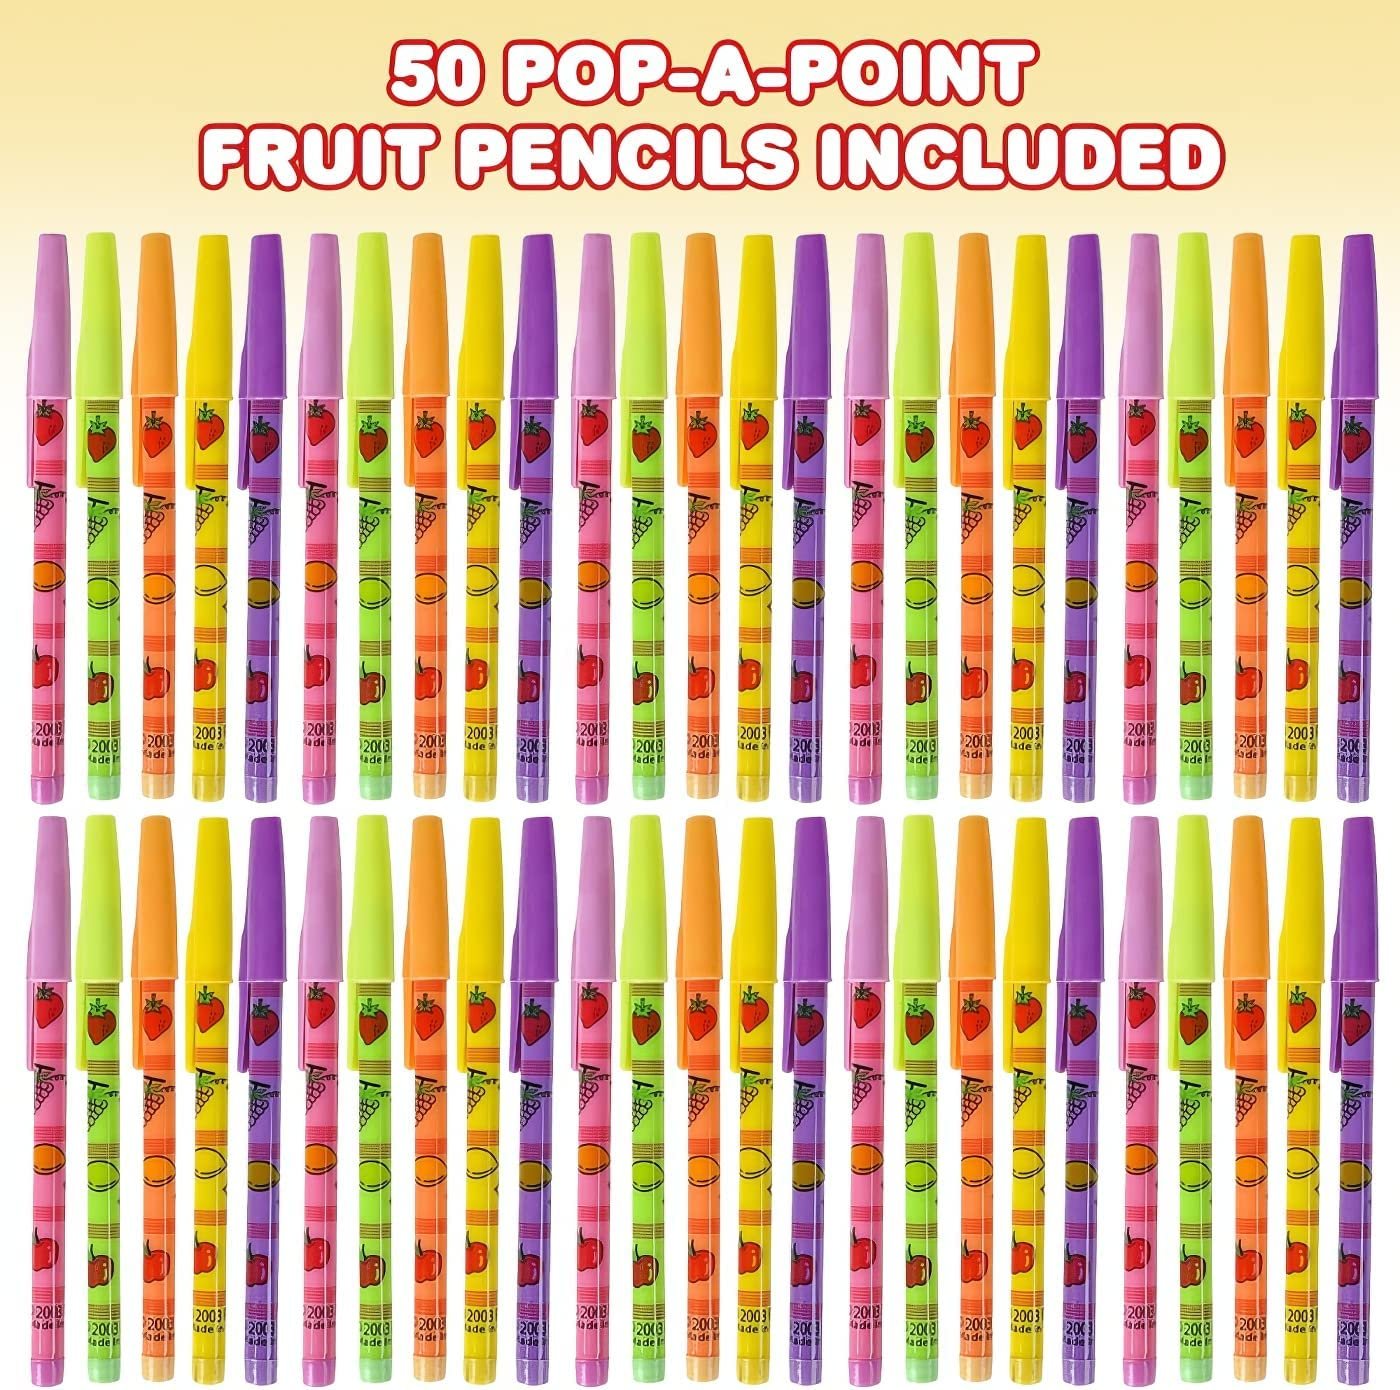 ArtCreativity Pop a Point Fruit Pencils, Bulk Set of 50, Non-Sharpening Pencils with Fruity Prints, School Stationery Supplies, Teacher Rewards, Cute Party Favors for Kids and Adults, Assorted Colors